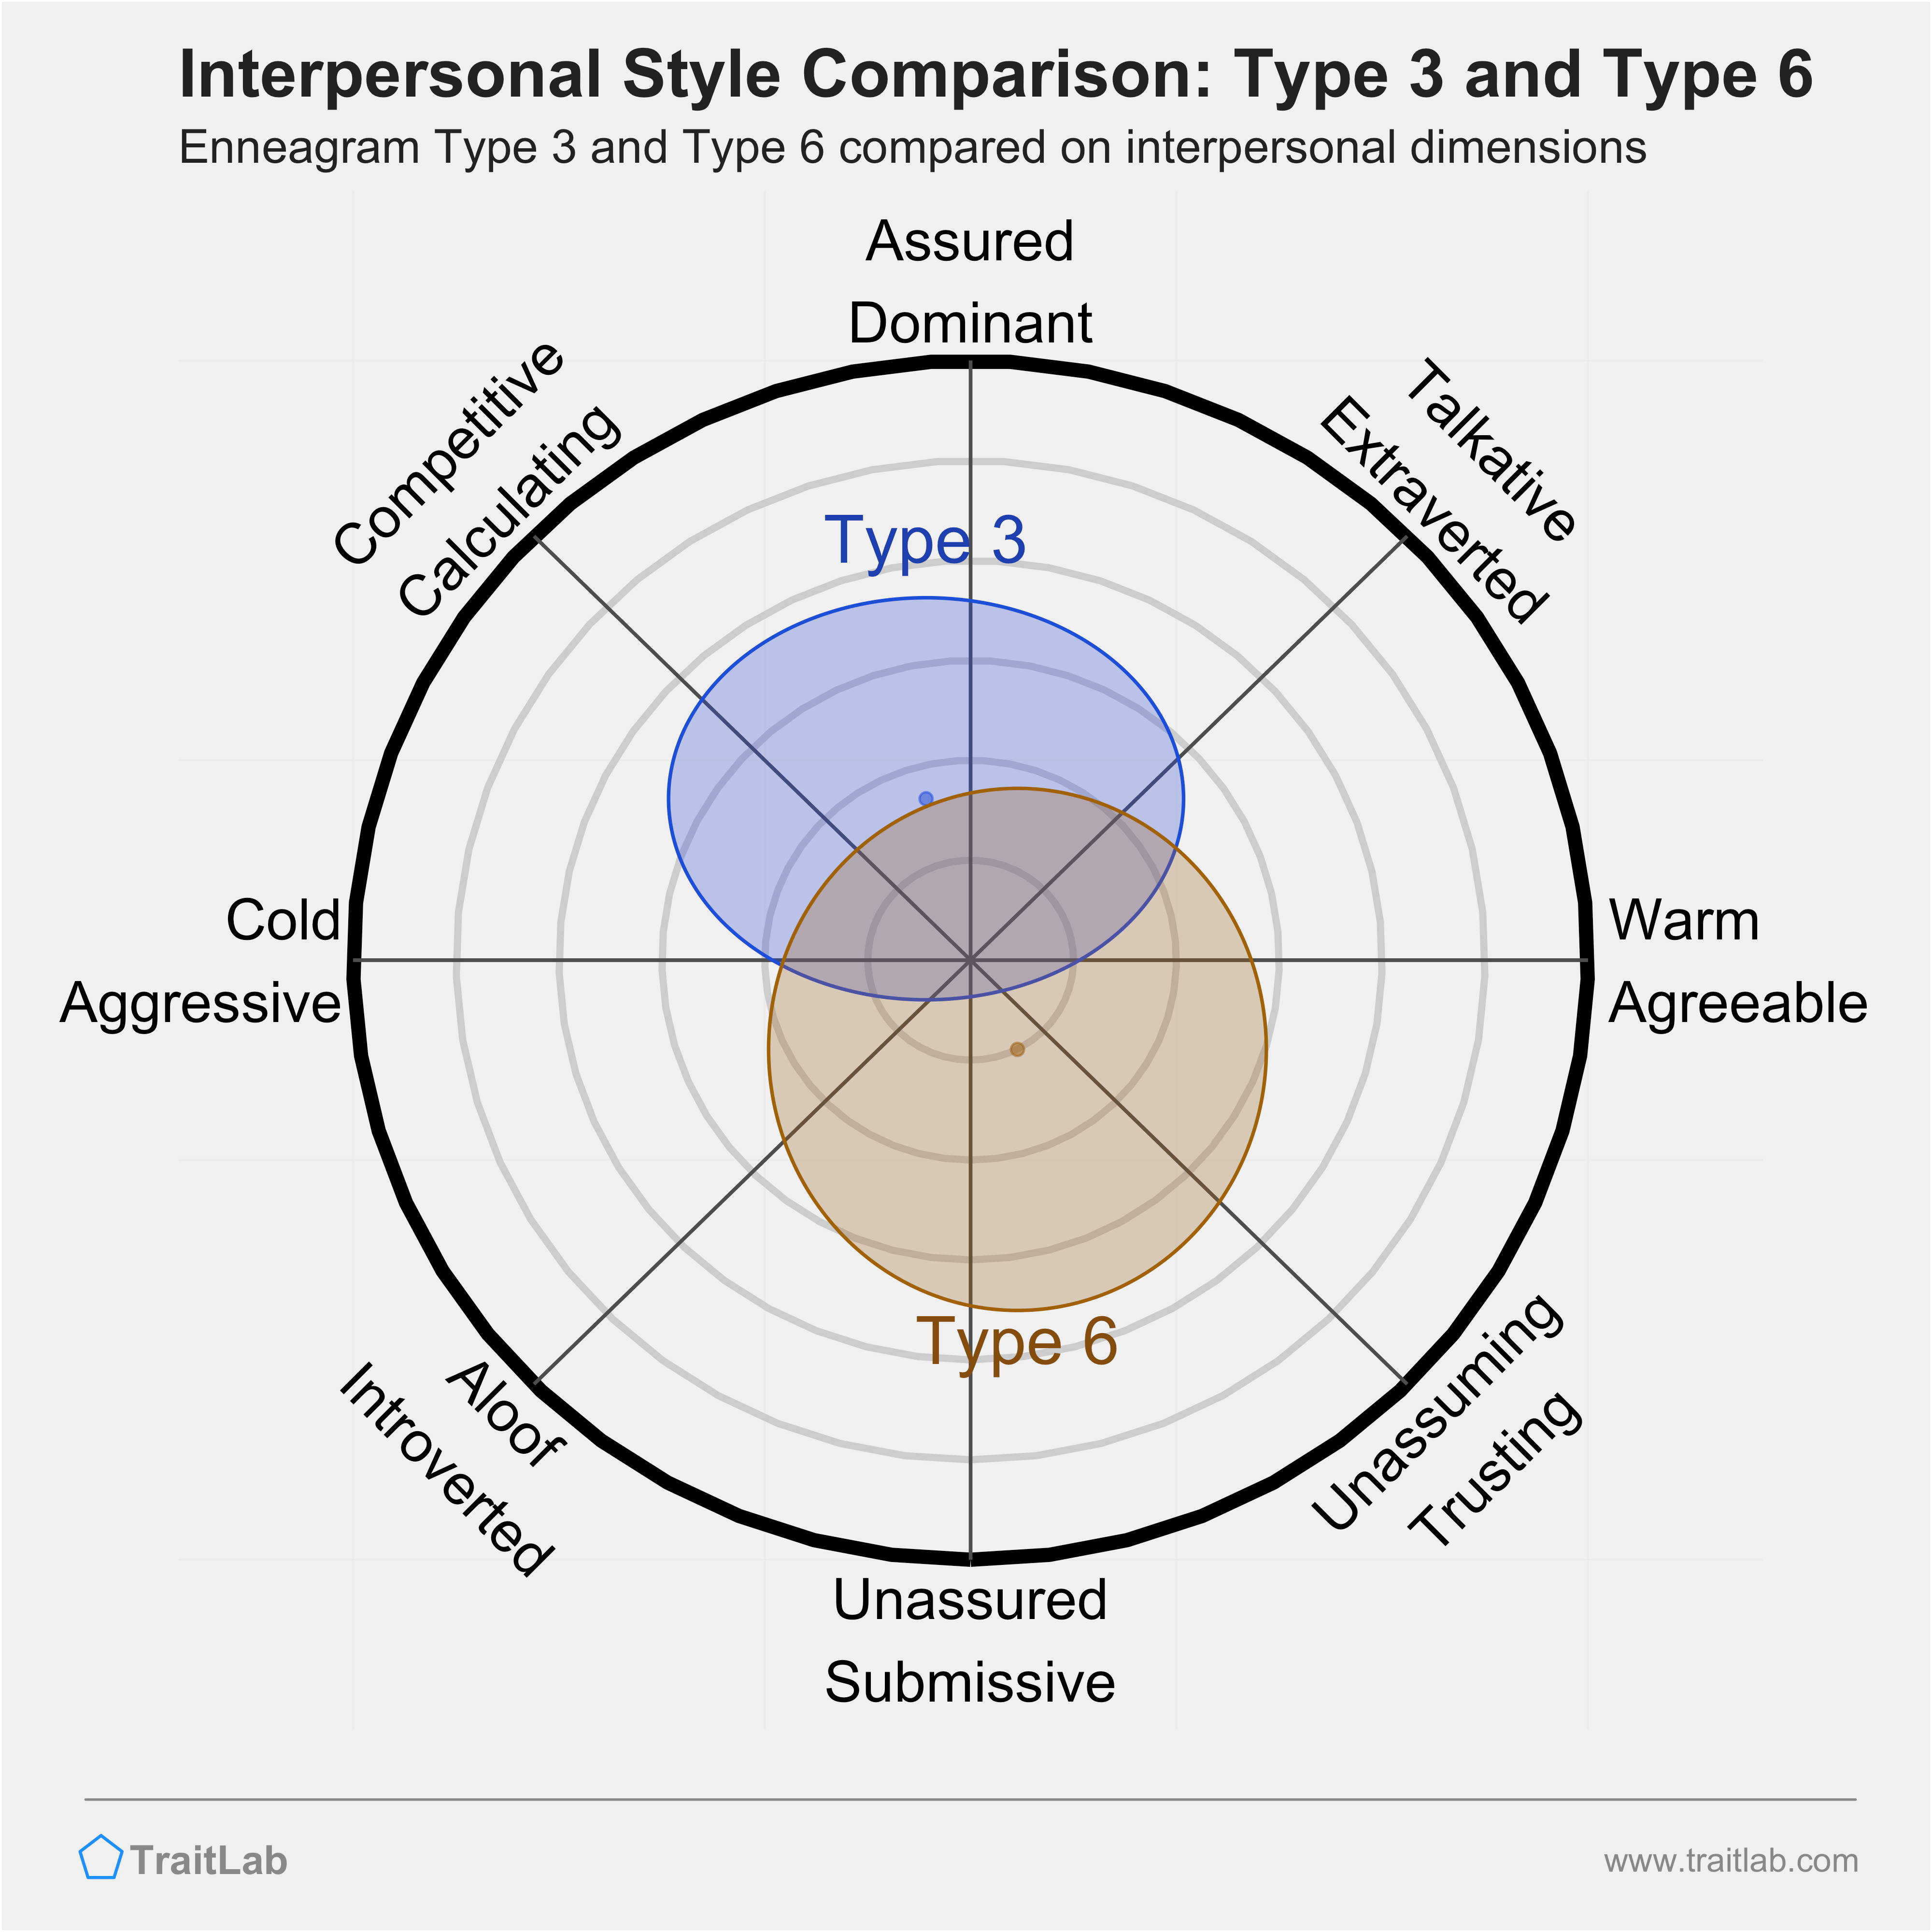 Enneagram Type 3 and Type 6 comparison across interpersonal dimensions